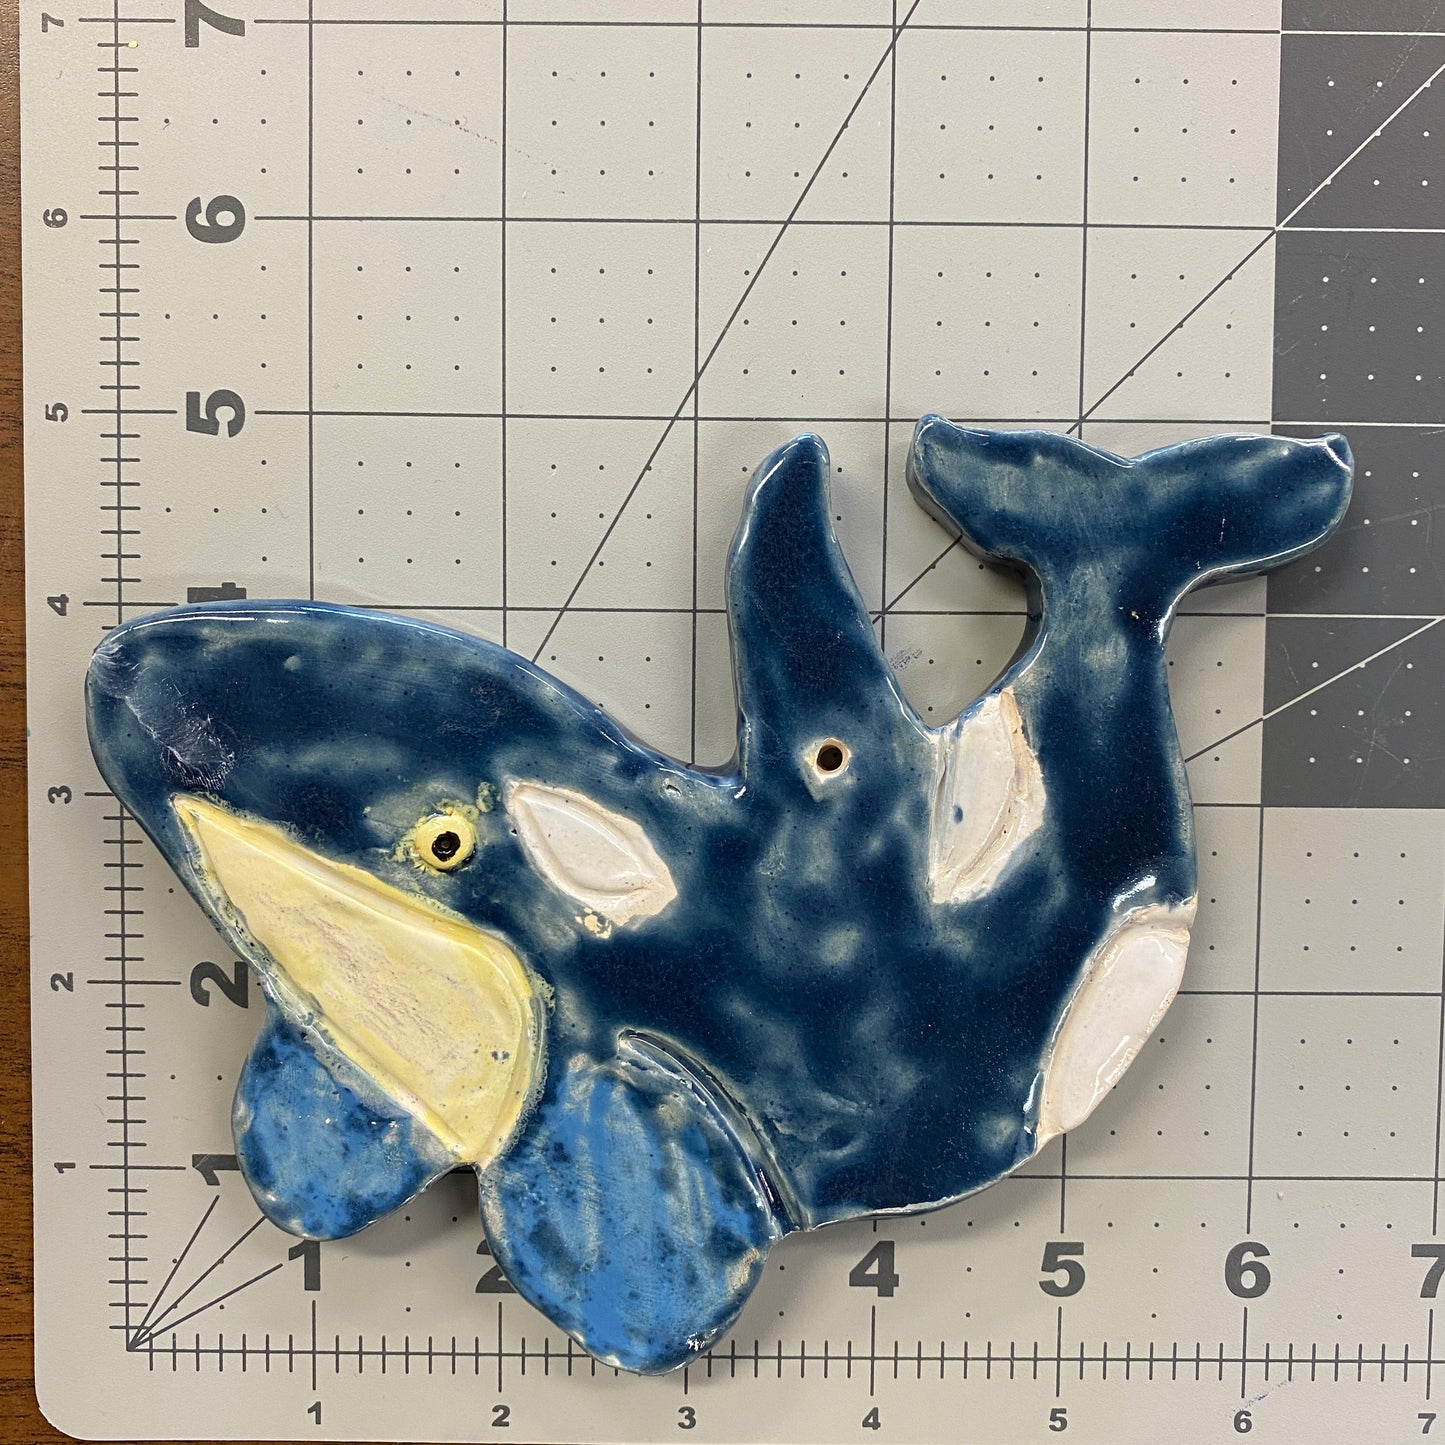 Ceramic Arts Handmade Clay Crafts Fresh Fish Glazed 6-inch x 6-inch Whale made by Breanne Wright